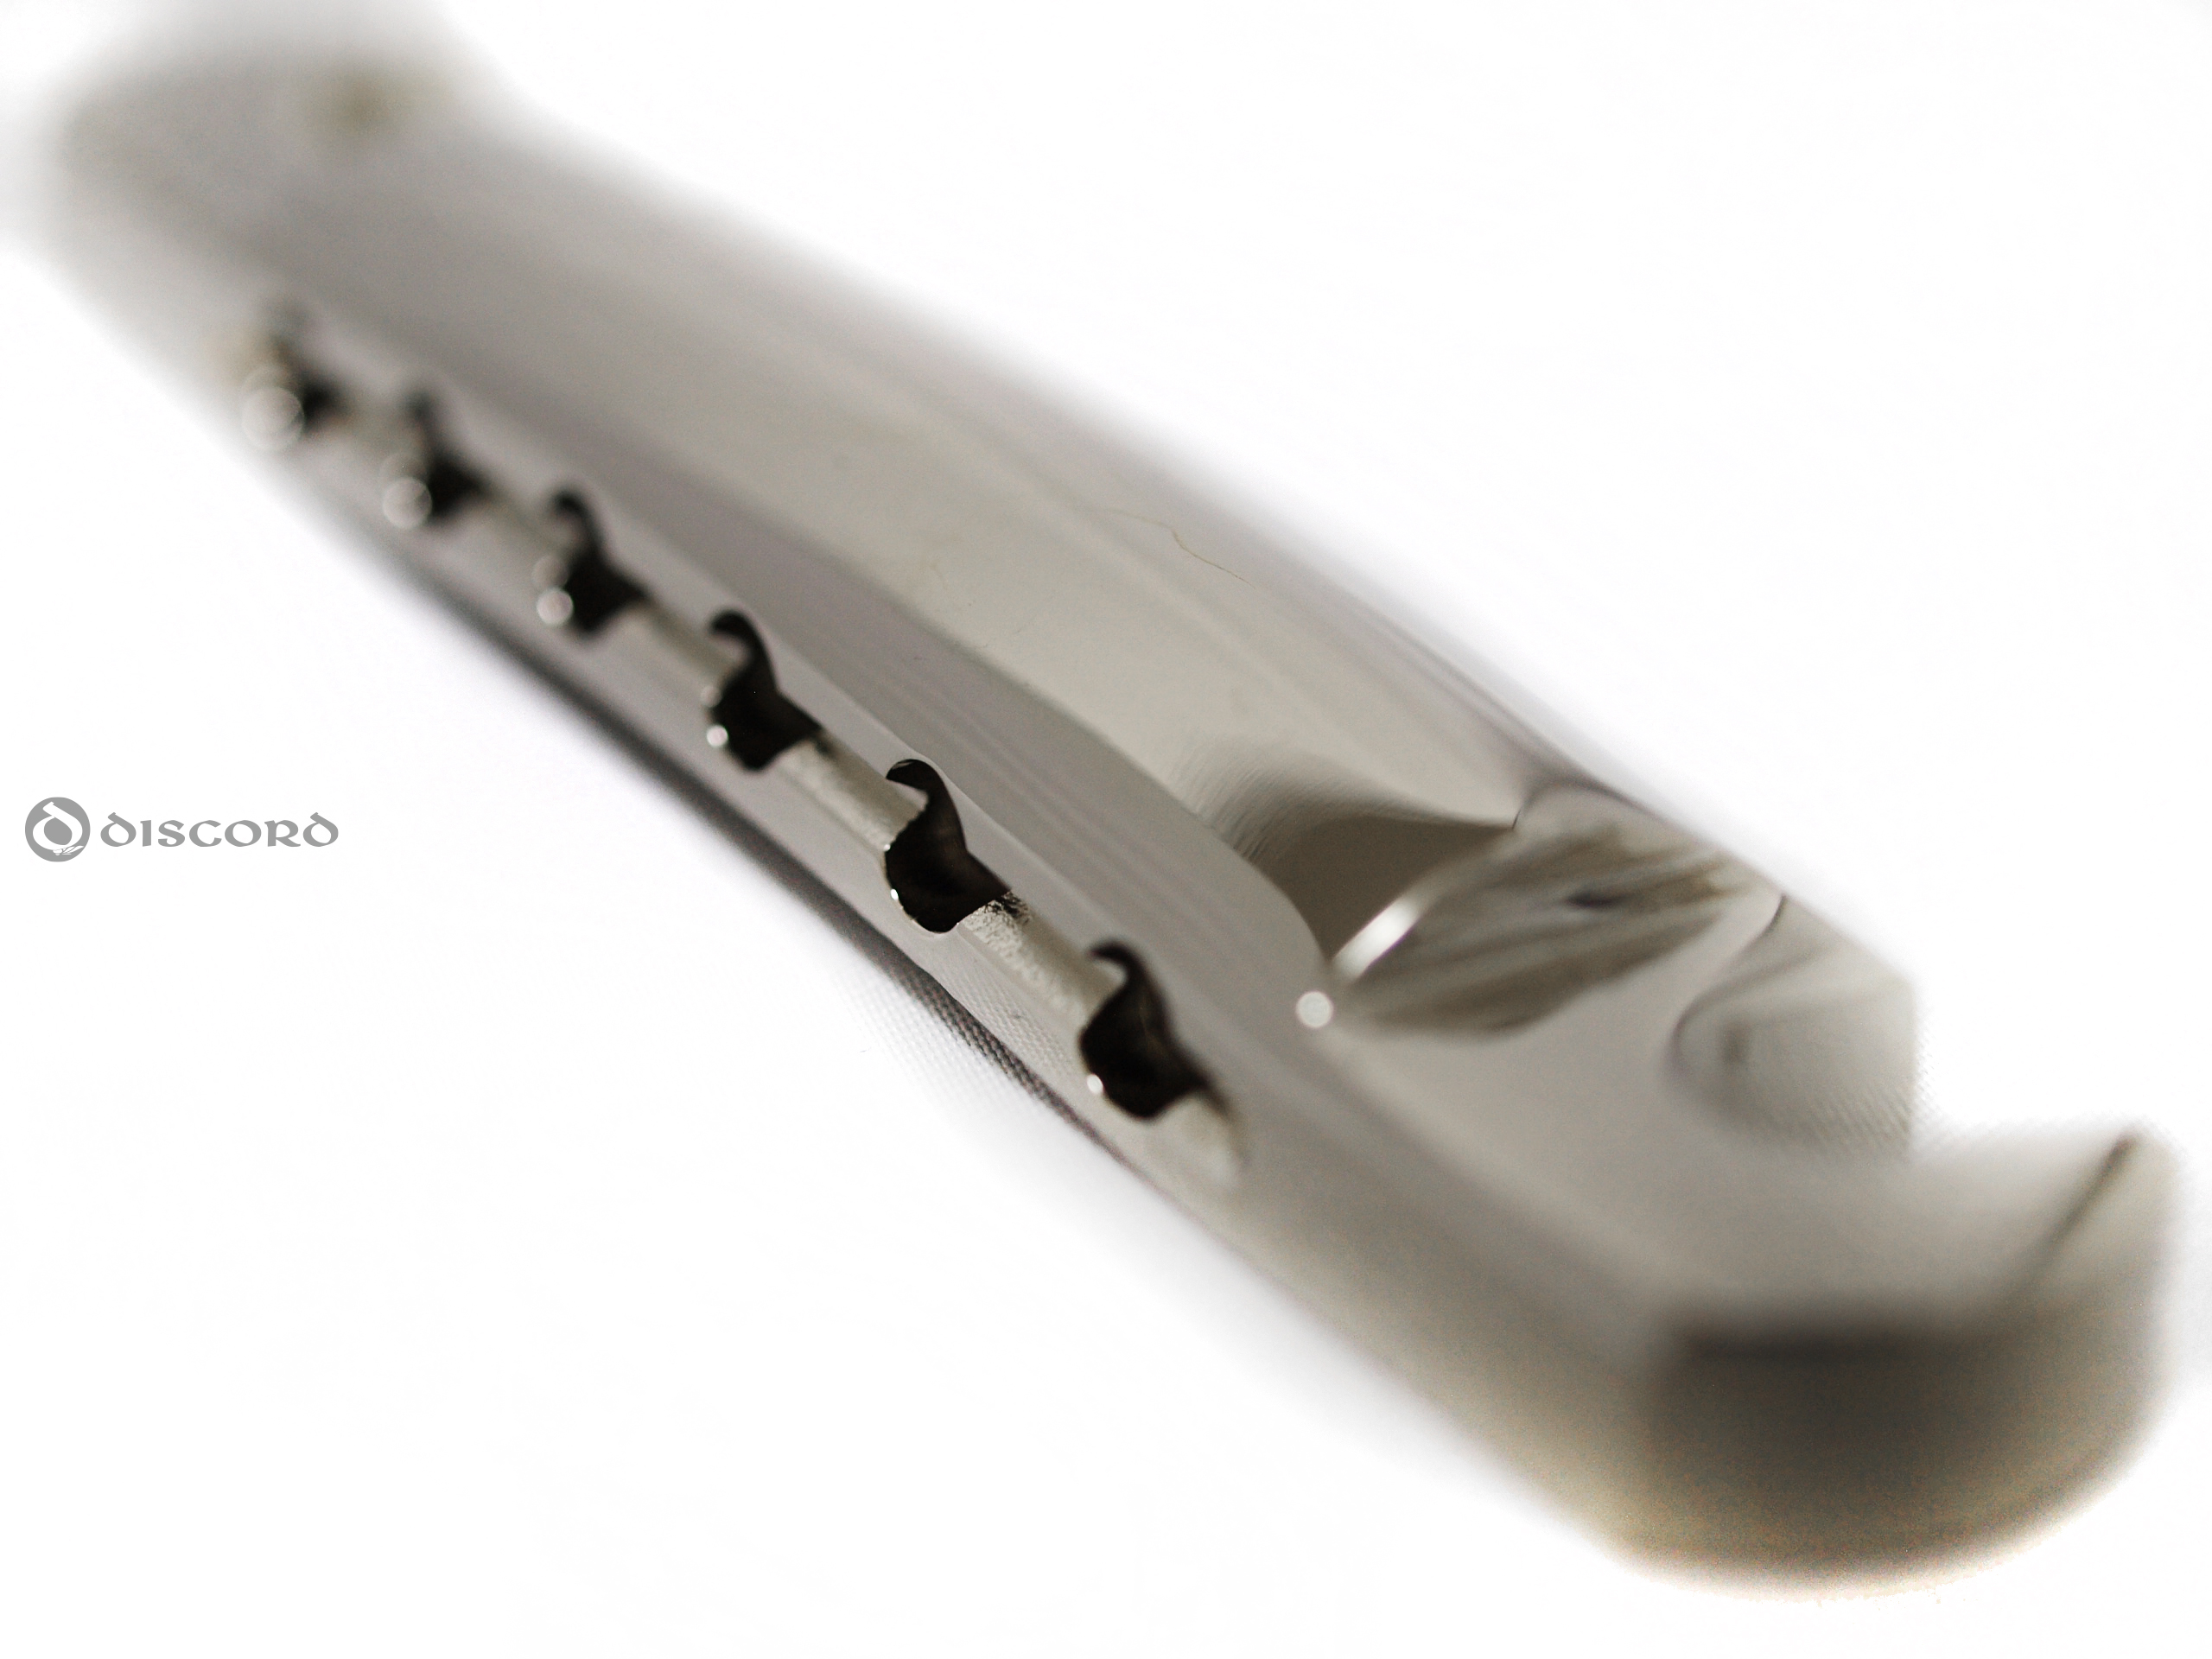 DISCORD 60's STYLE ALUMINIUM TAILPIECE NICKEL manufacturer page 